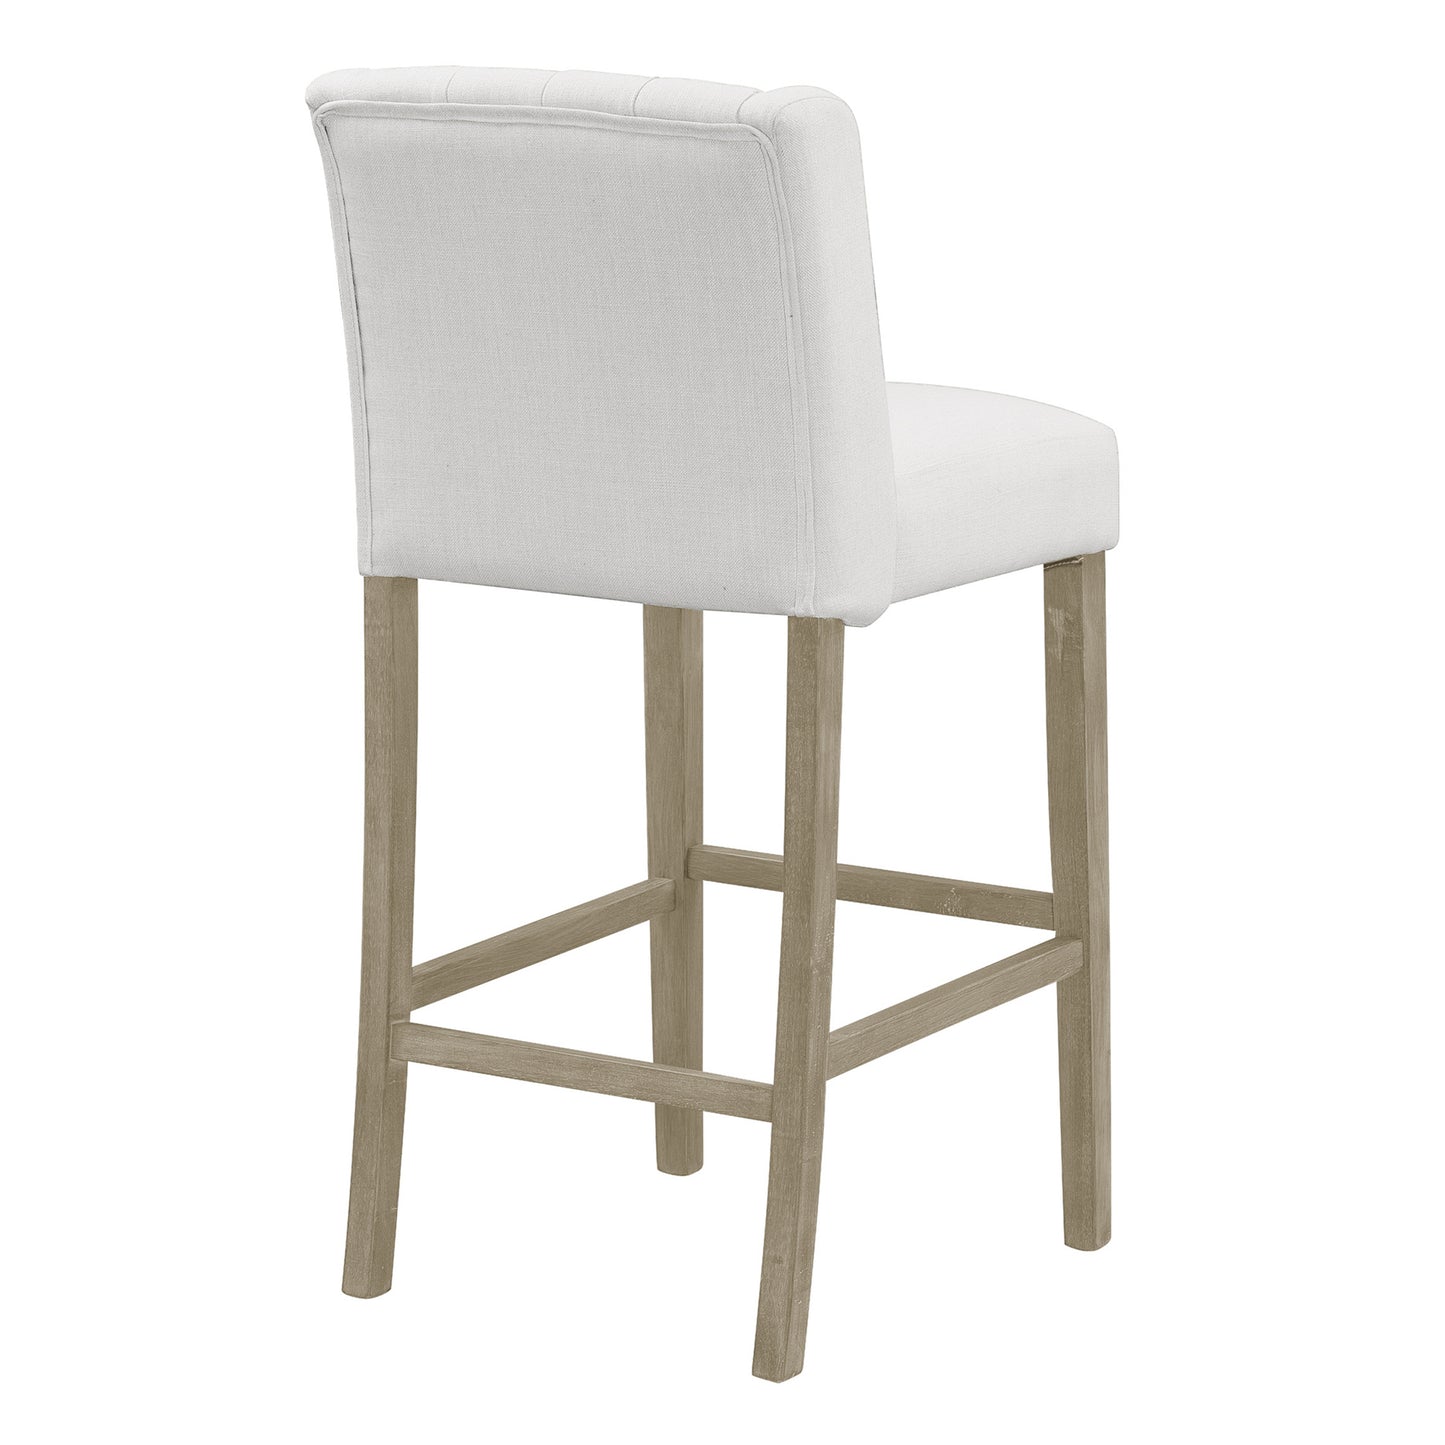 Set of 2 Aled Beige Fabric Bar Stool with Side Wings and Tufted Buttons